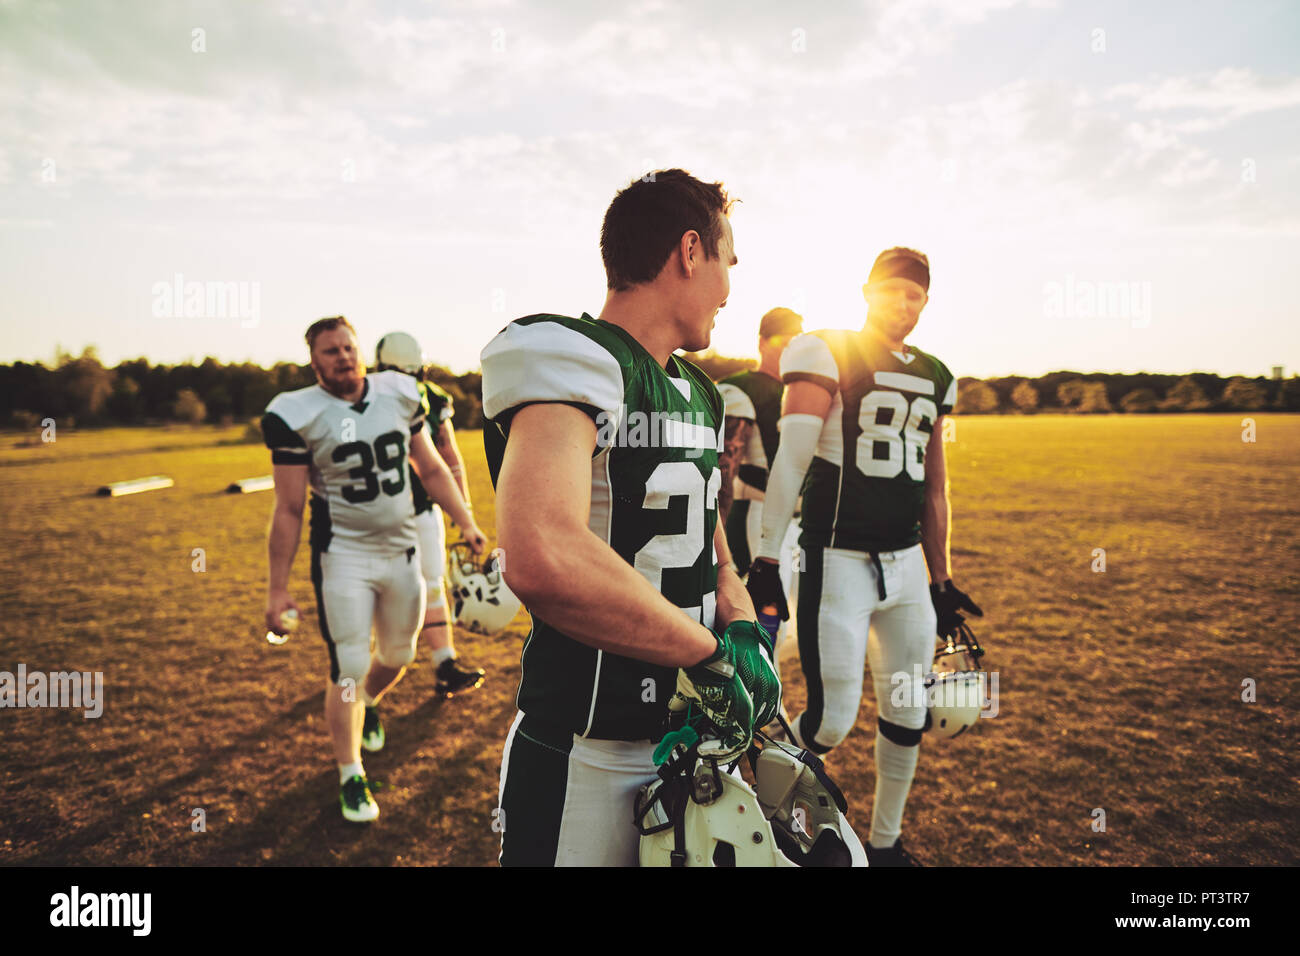 Team of smiling young American football players walking off a sports field together after an afternoon practice Stock Photo